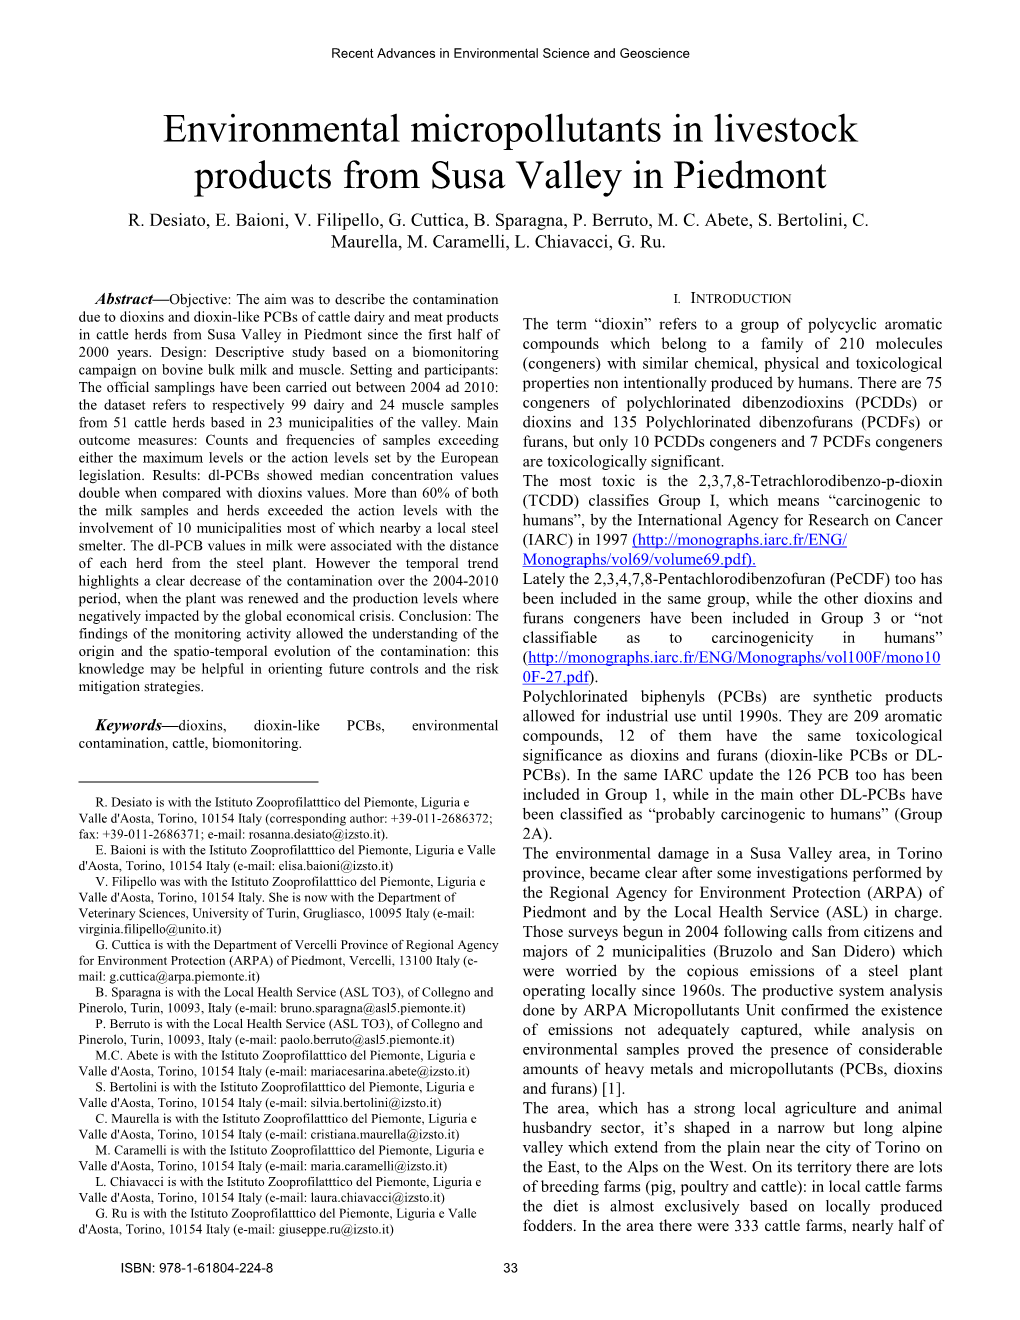 Environmental Micropollutants in Livestock Products from Susa Valley in Piedmont R